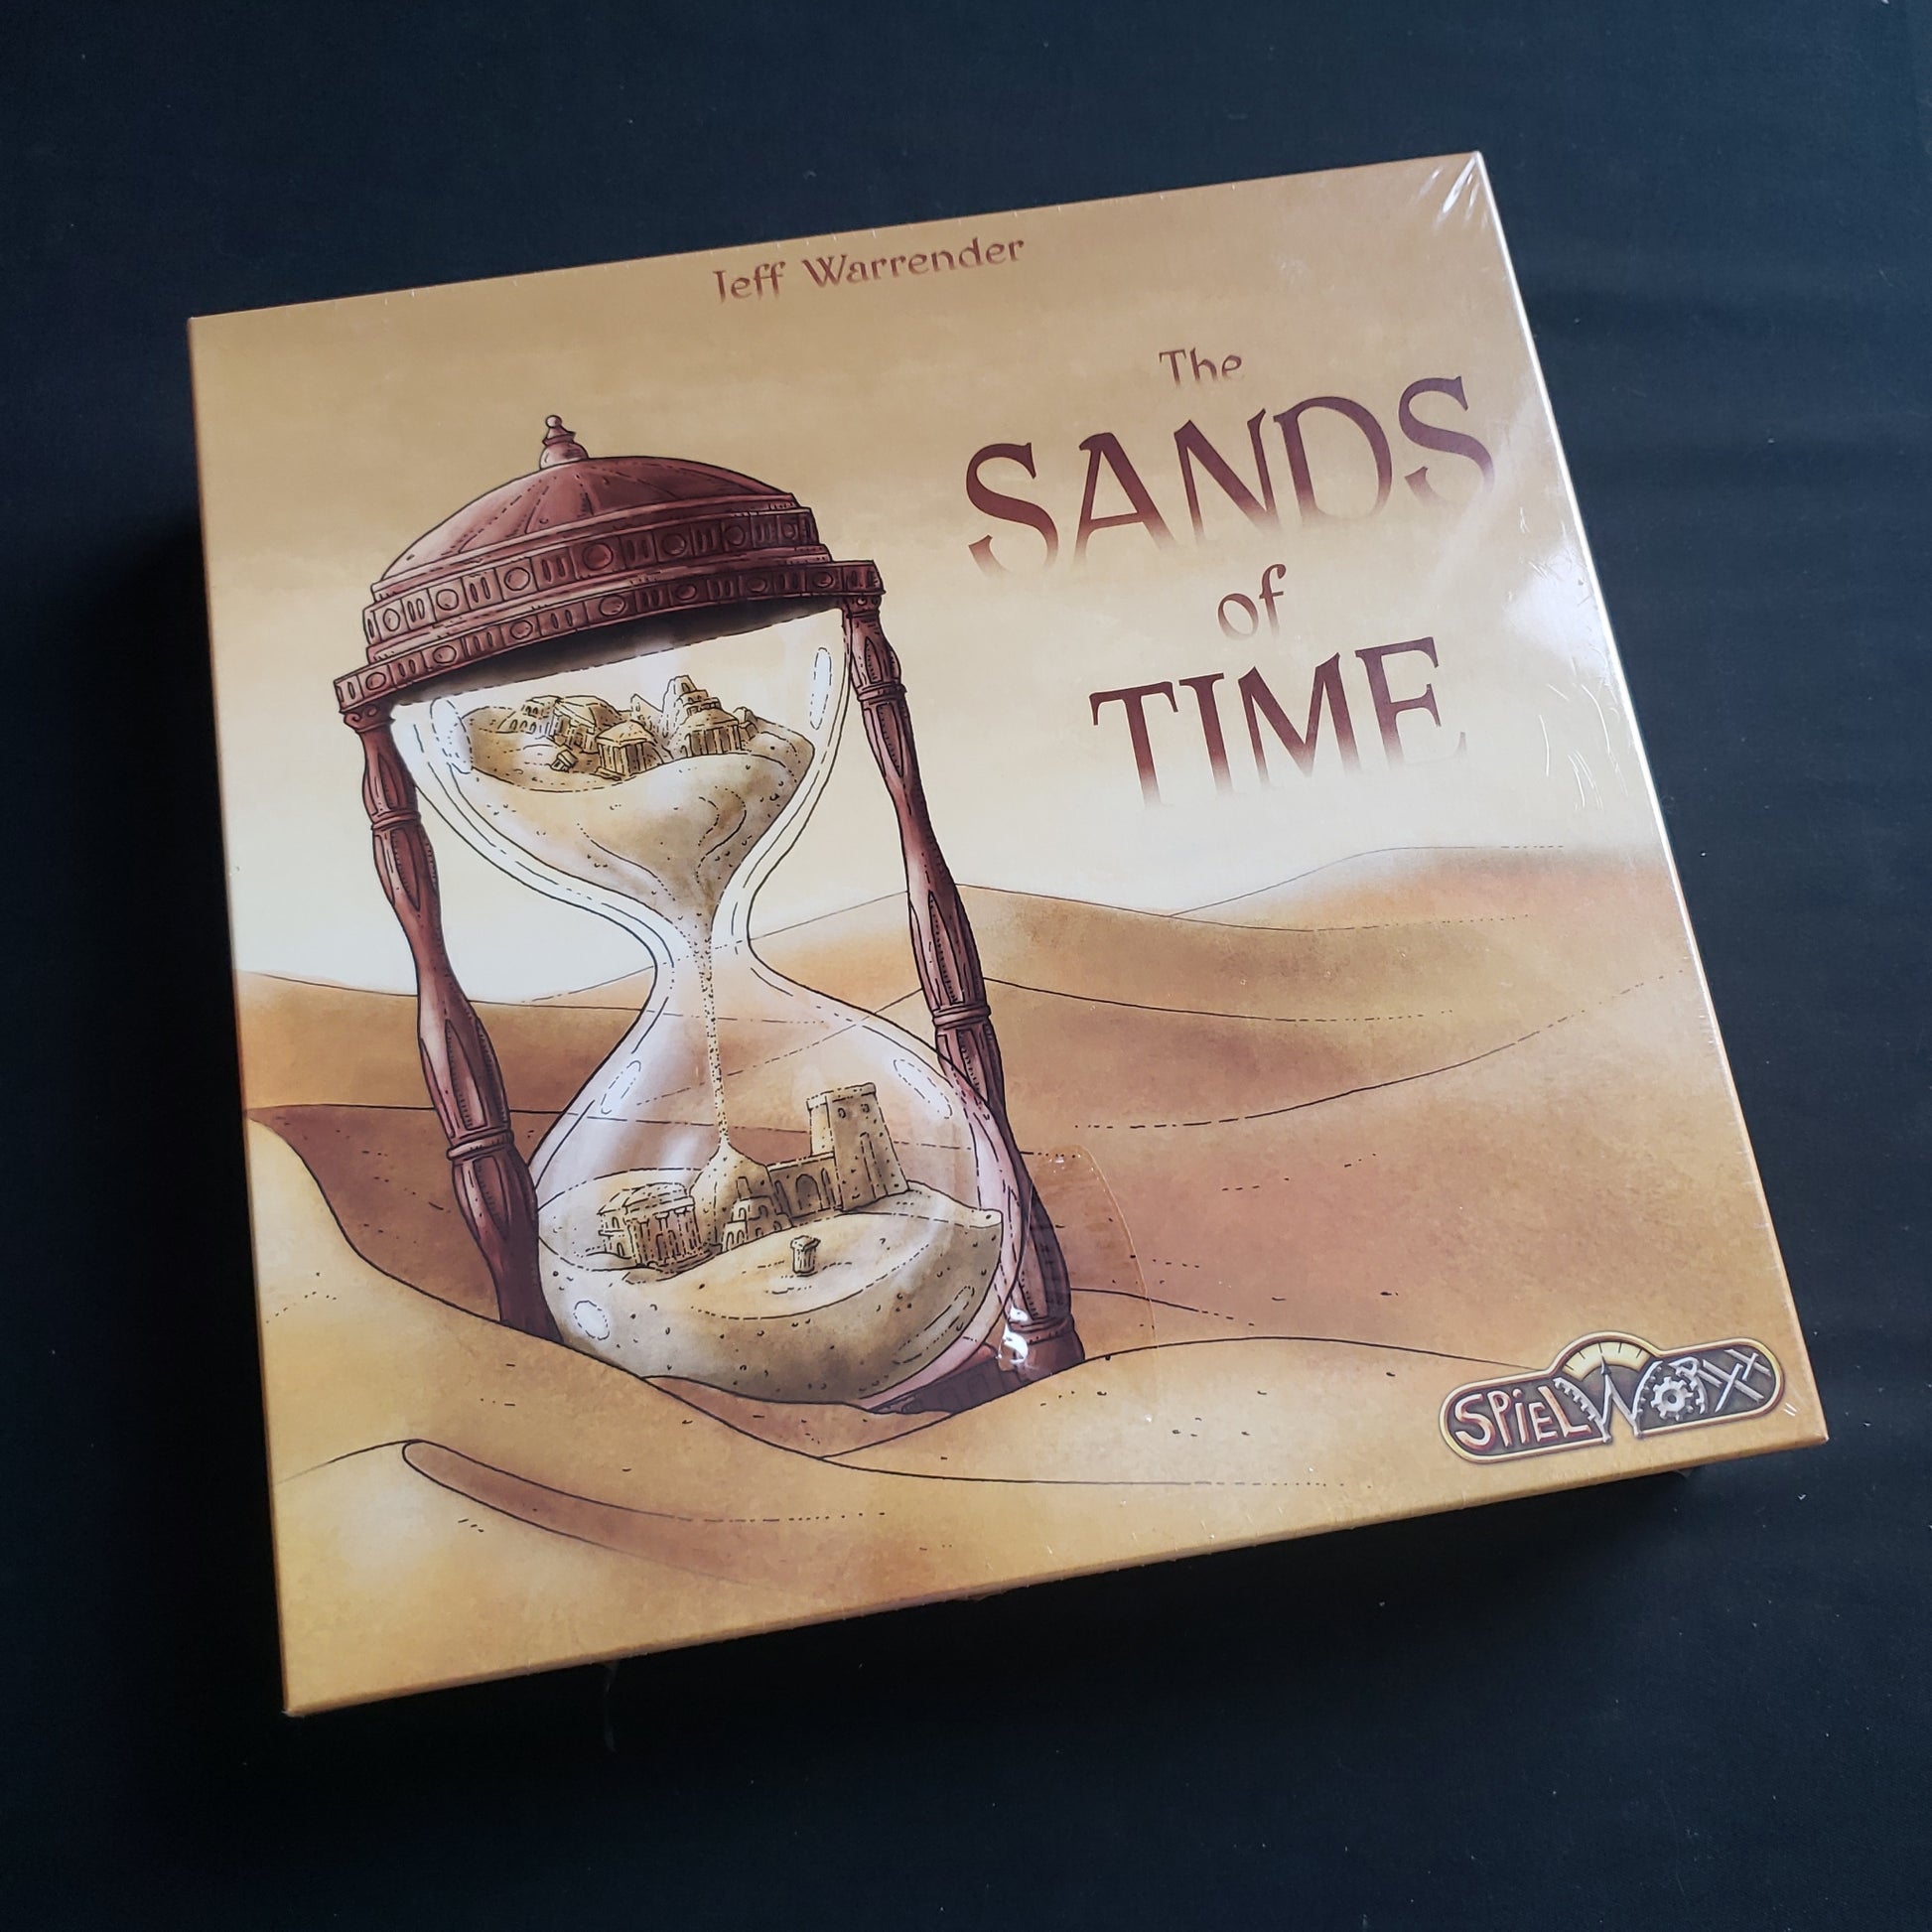 Image shows the front cover of the box of the Sands of Time board game